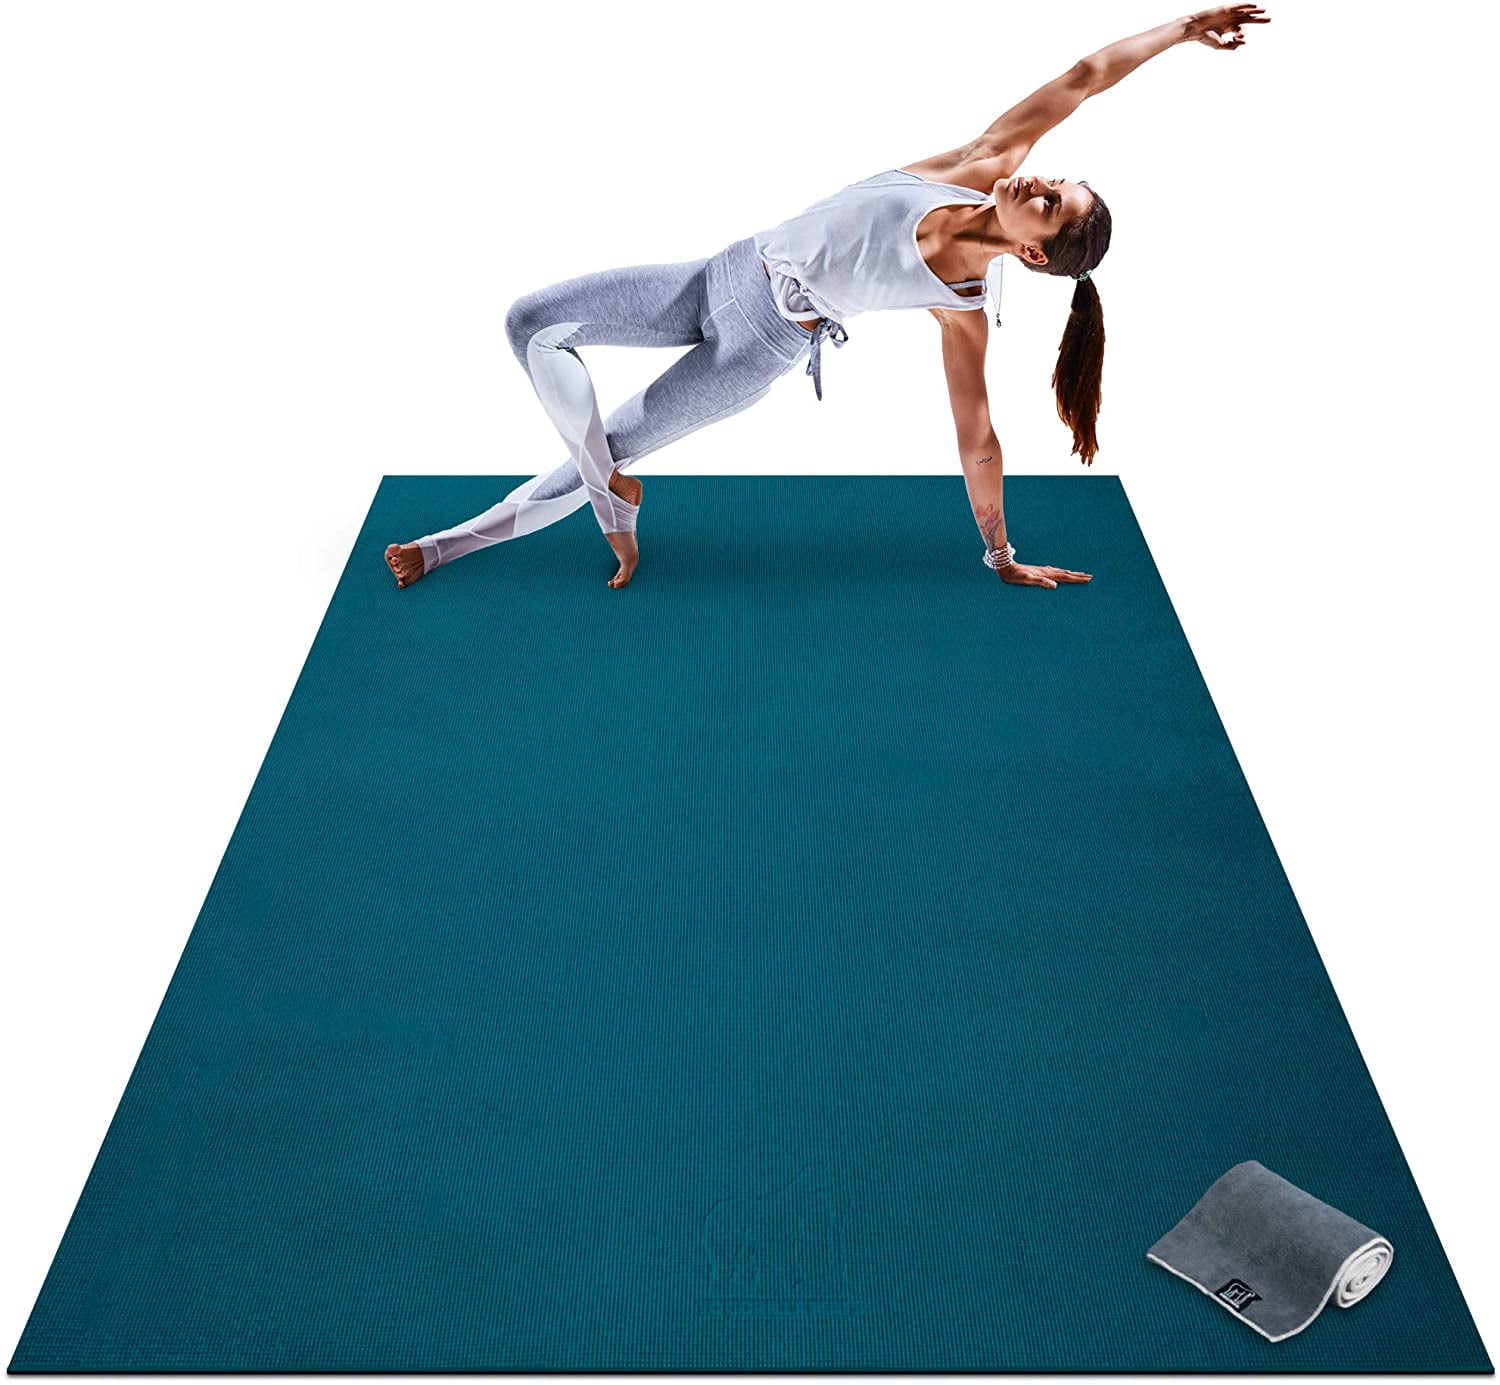 Durable Large Yoga Mat 6'x4'x8mm Extra Thick Eco-Friendly Non-Slip & Odorless Barefoot Exercise and Premium Fitness Home Gym Flooring Mat by ActiveGear 